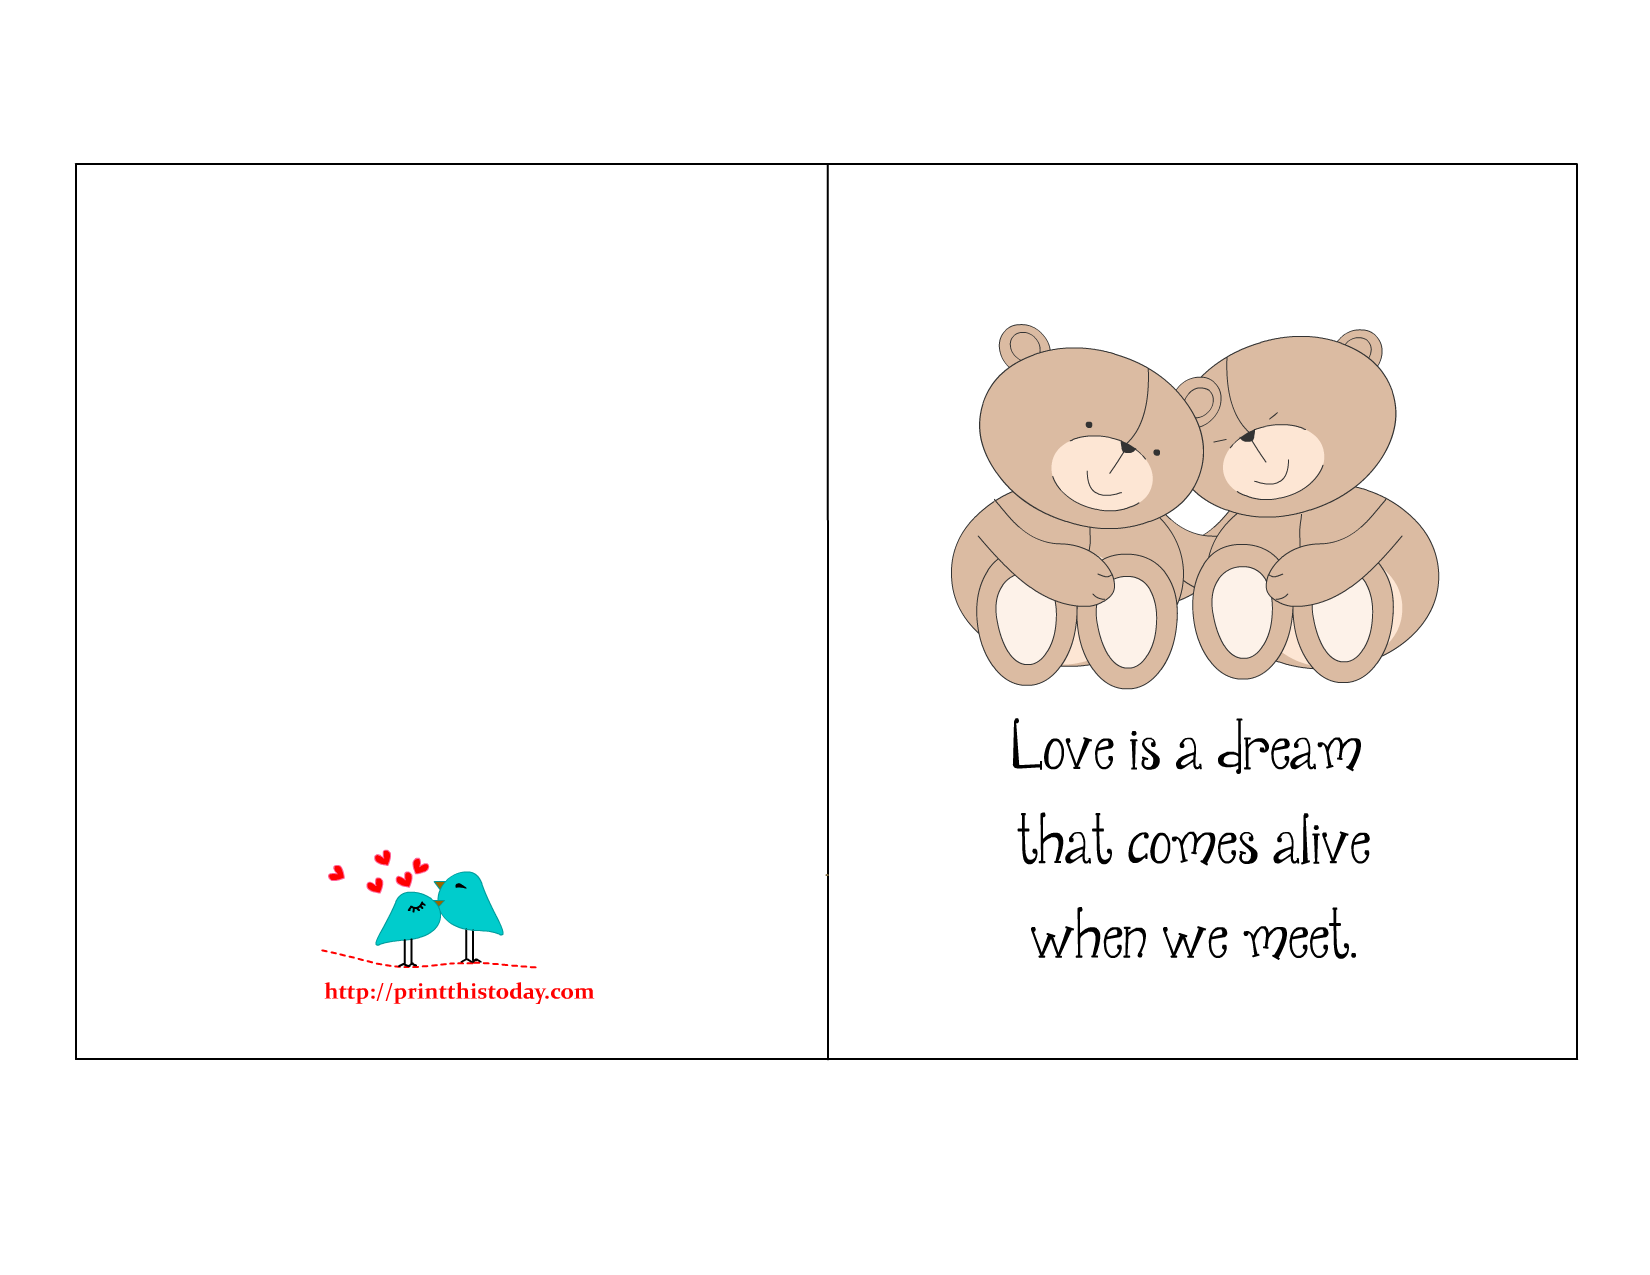 Free Printable Valentine card with a romantic quote and cute picture